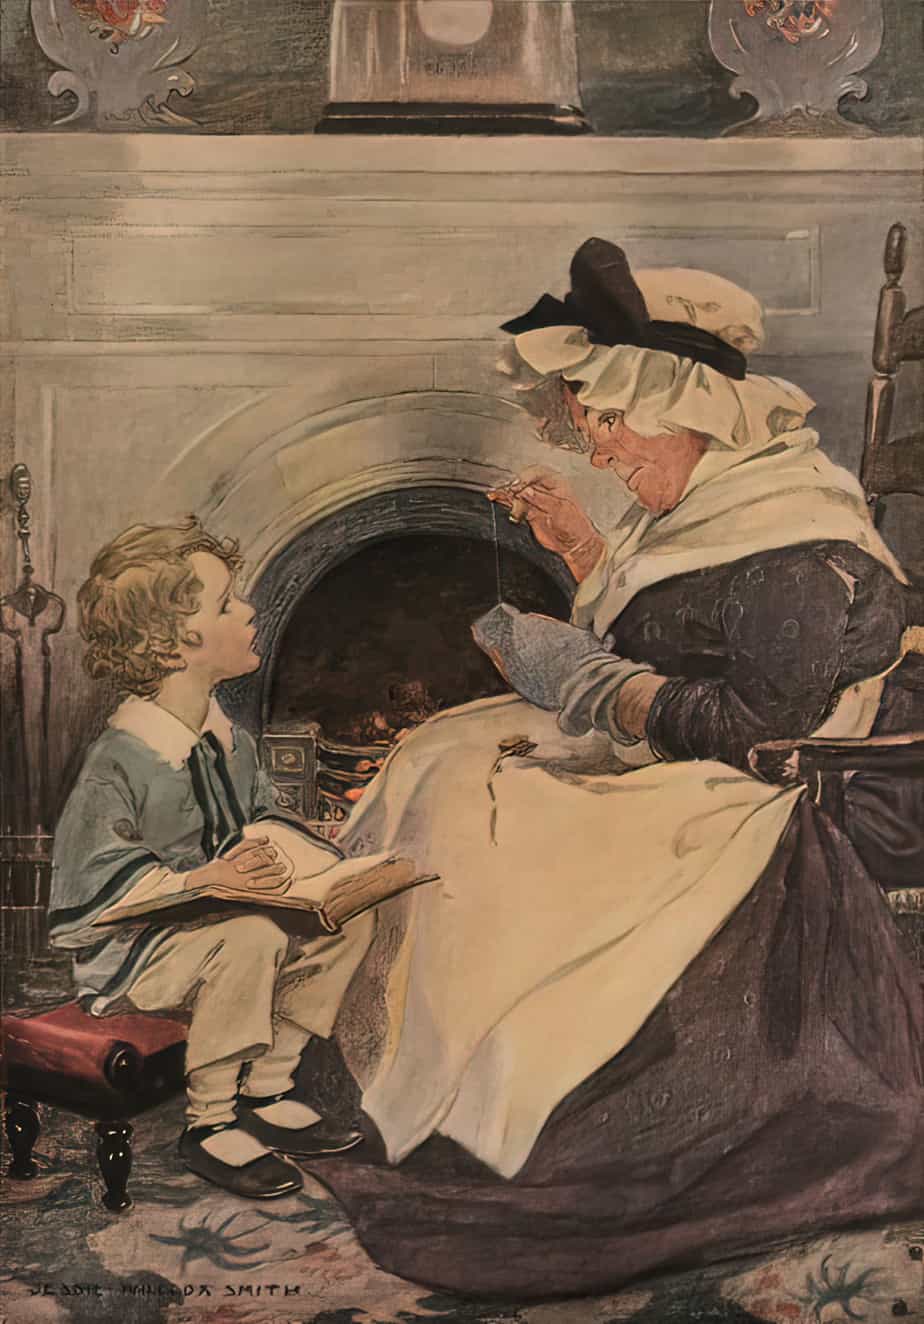 Plate from Dickens's children by Jessie Willcox Smith. Published 1912